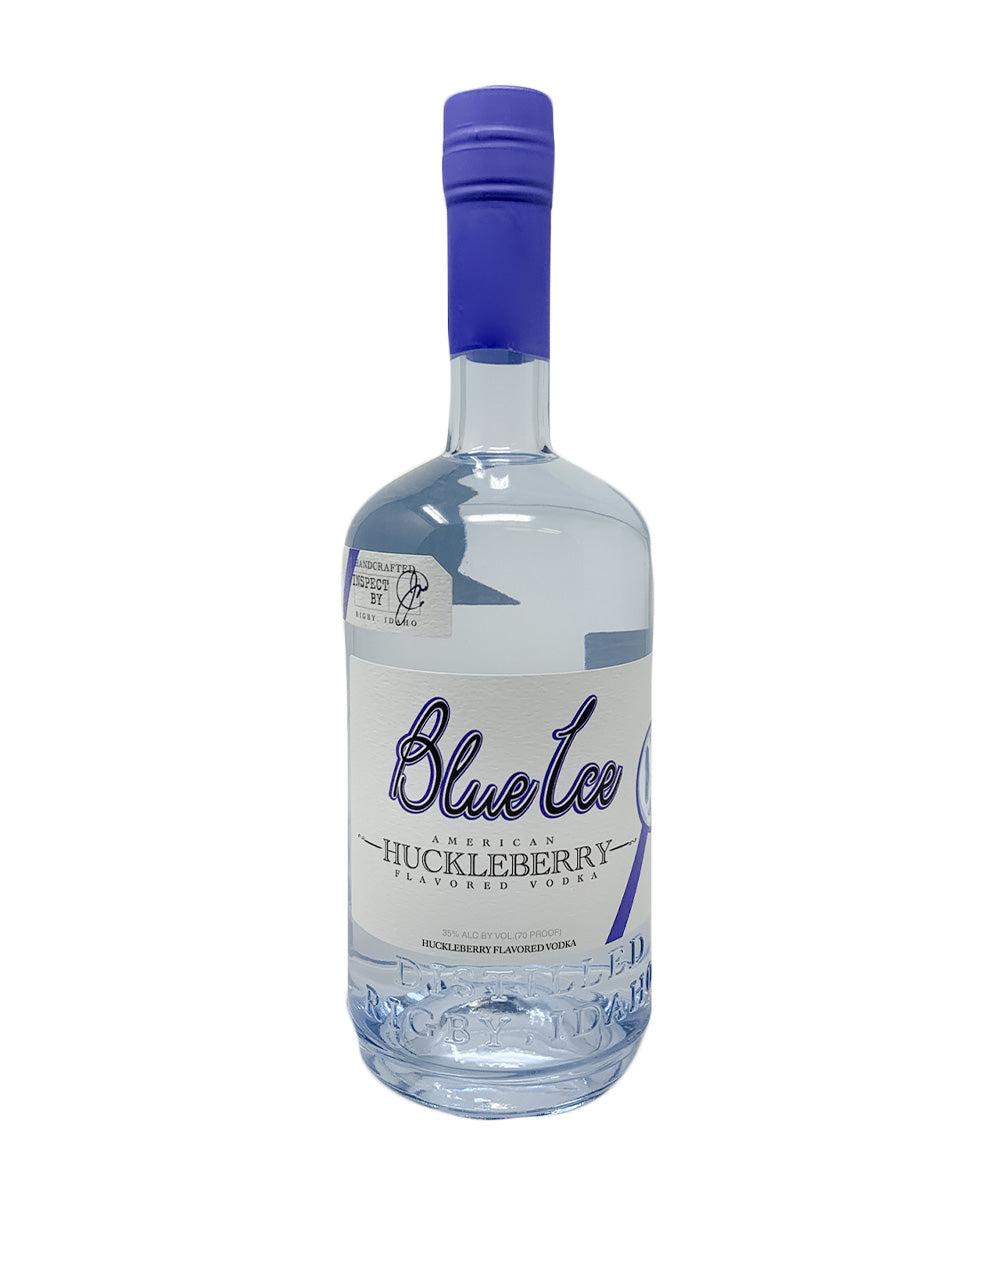 Blue Ice Huckleberry Flavored Vodka